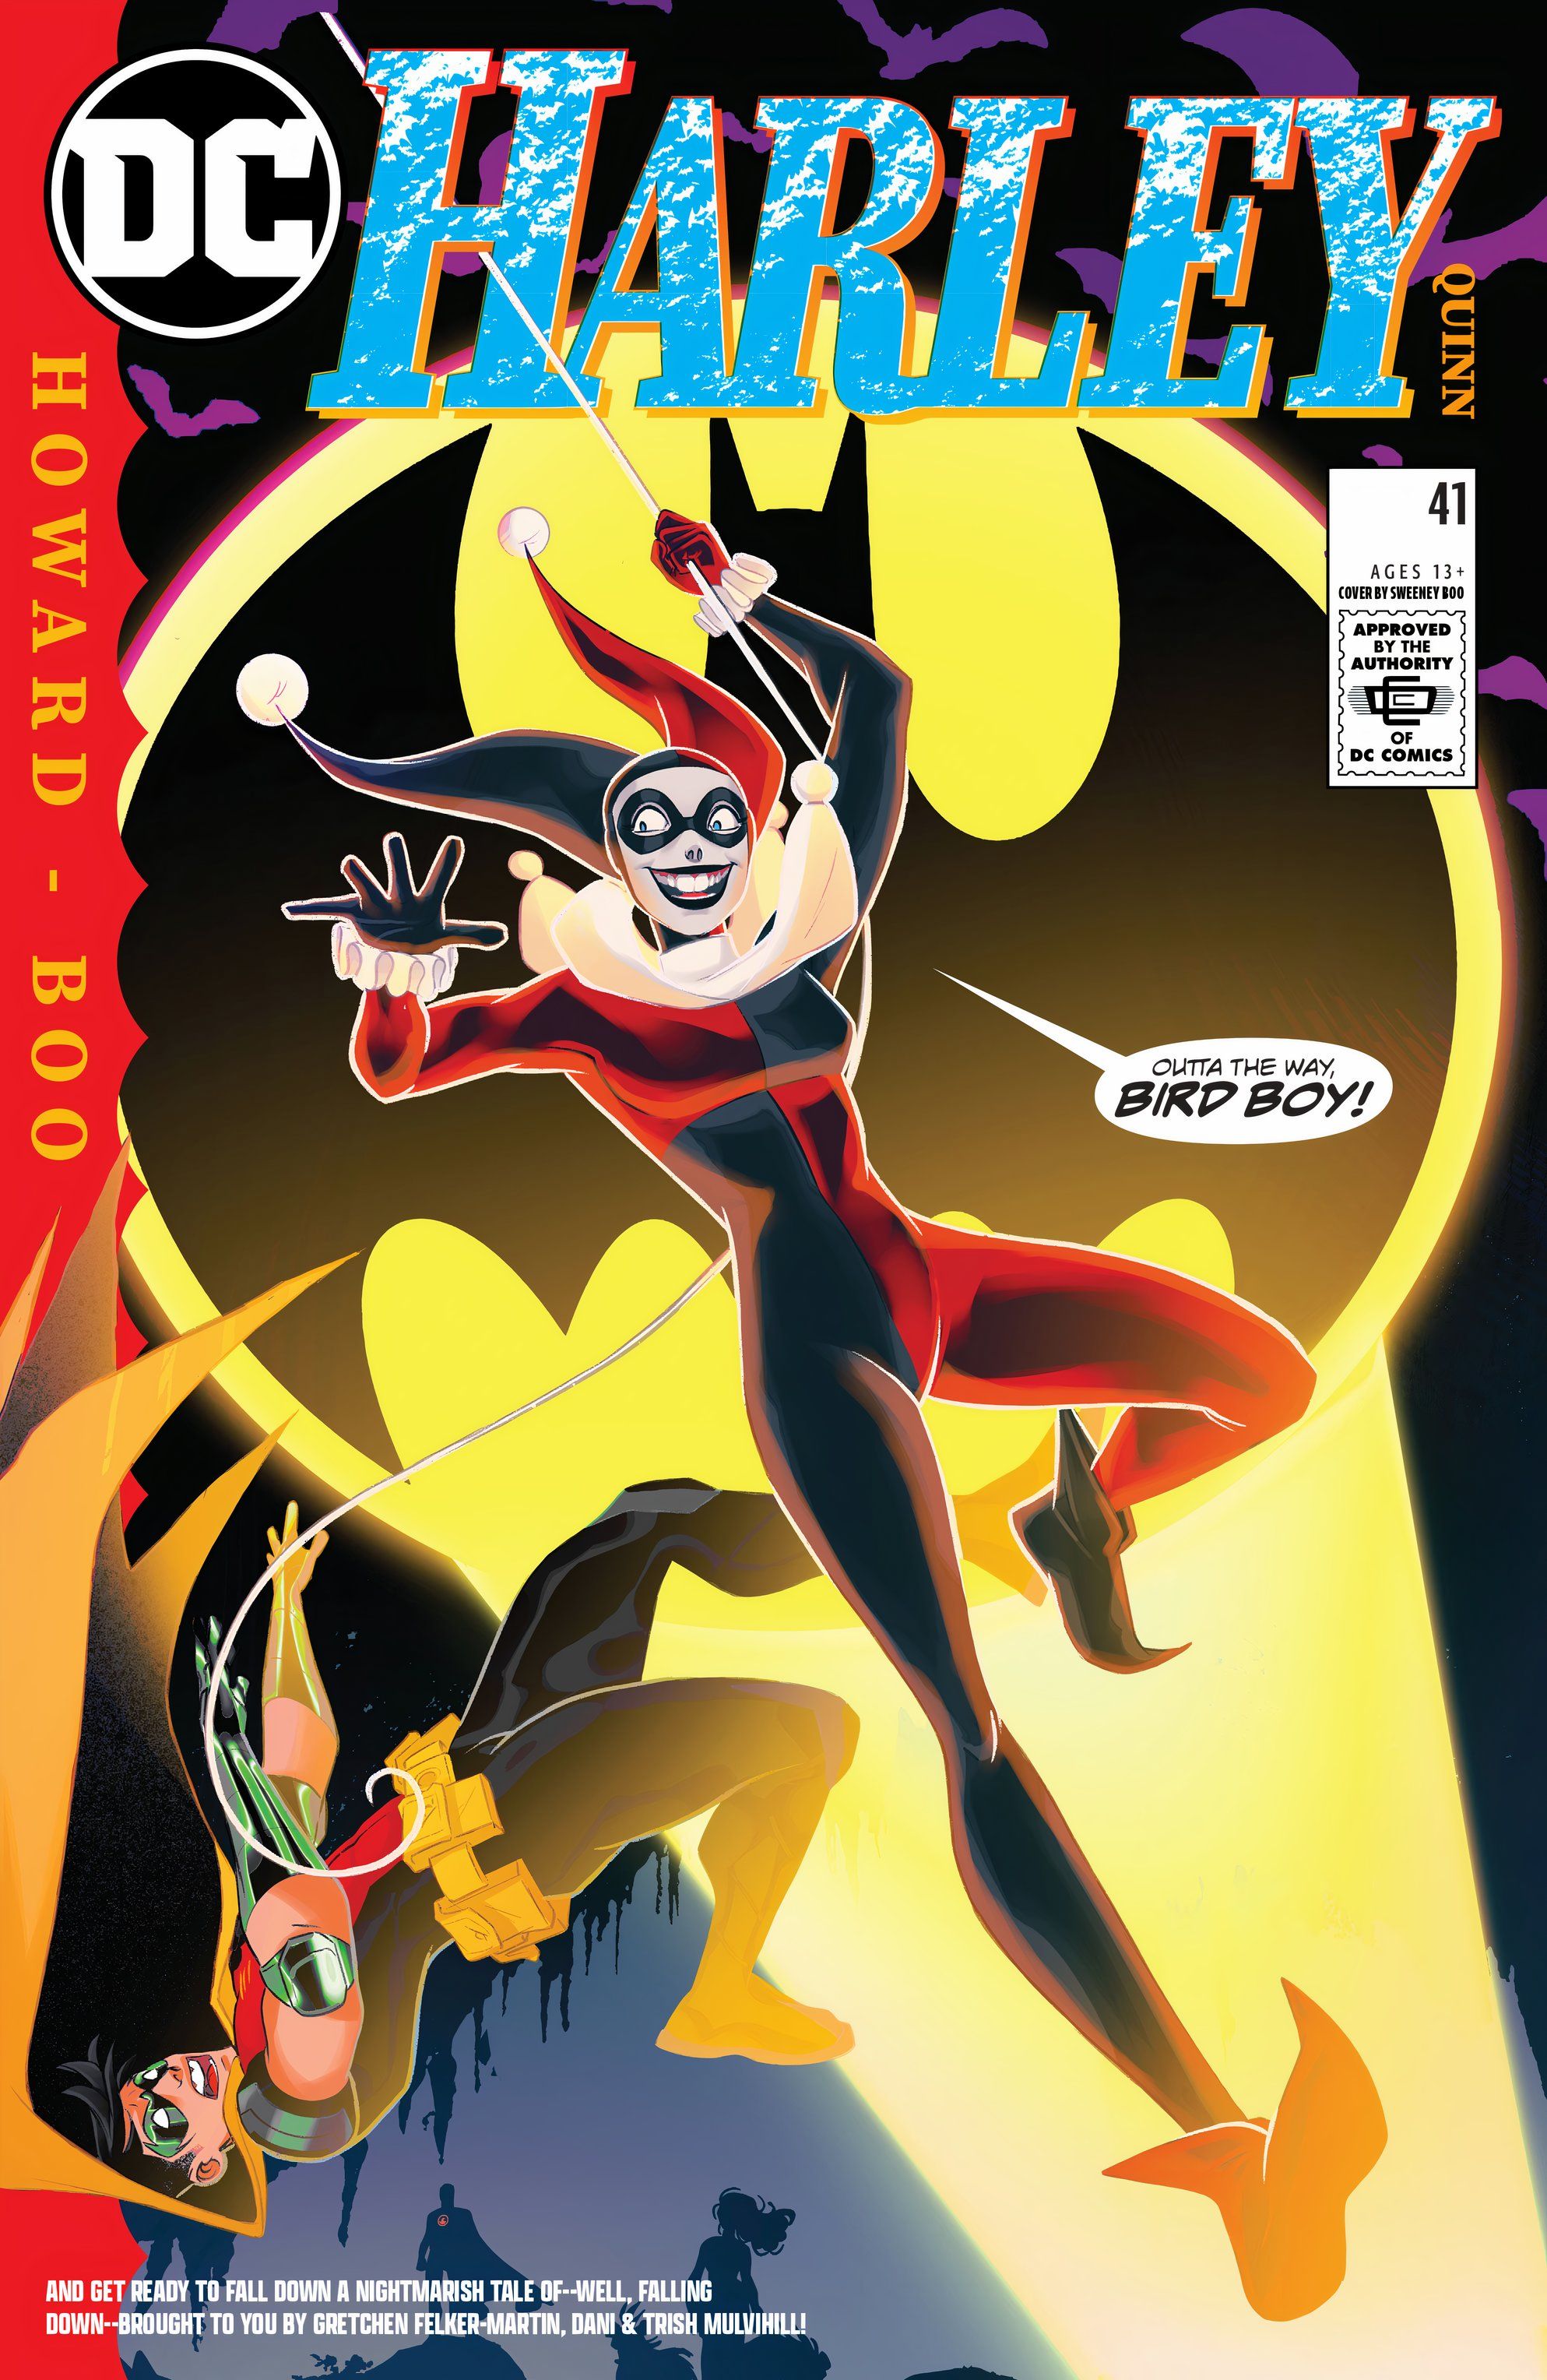 Harley Quinn 41 Main Cover: Harley Quinn leaping in front of the Bat-Symbol, knocking over Robin Tim Drake.